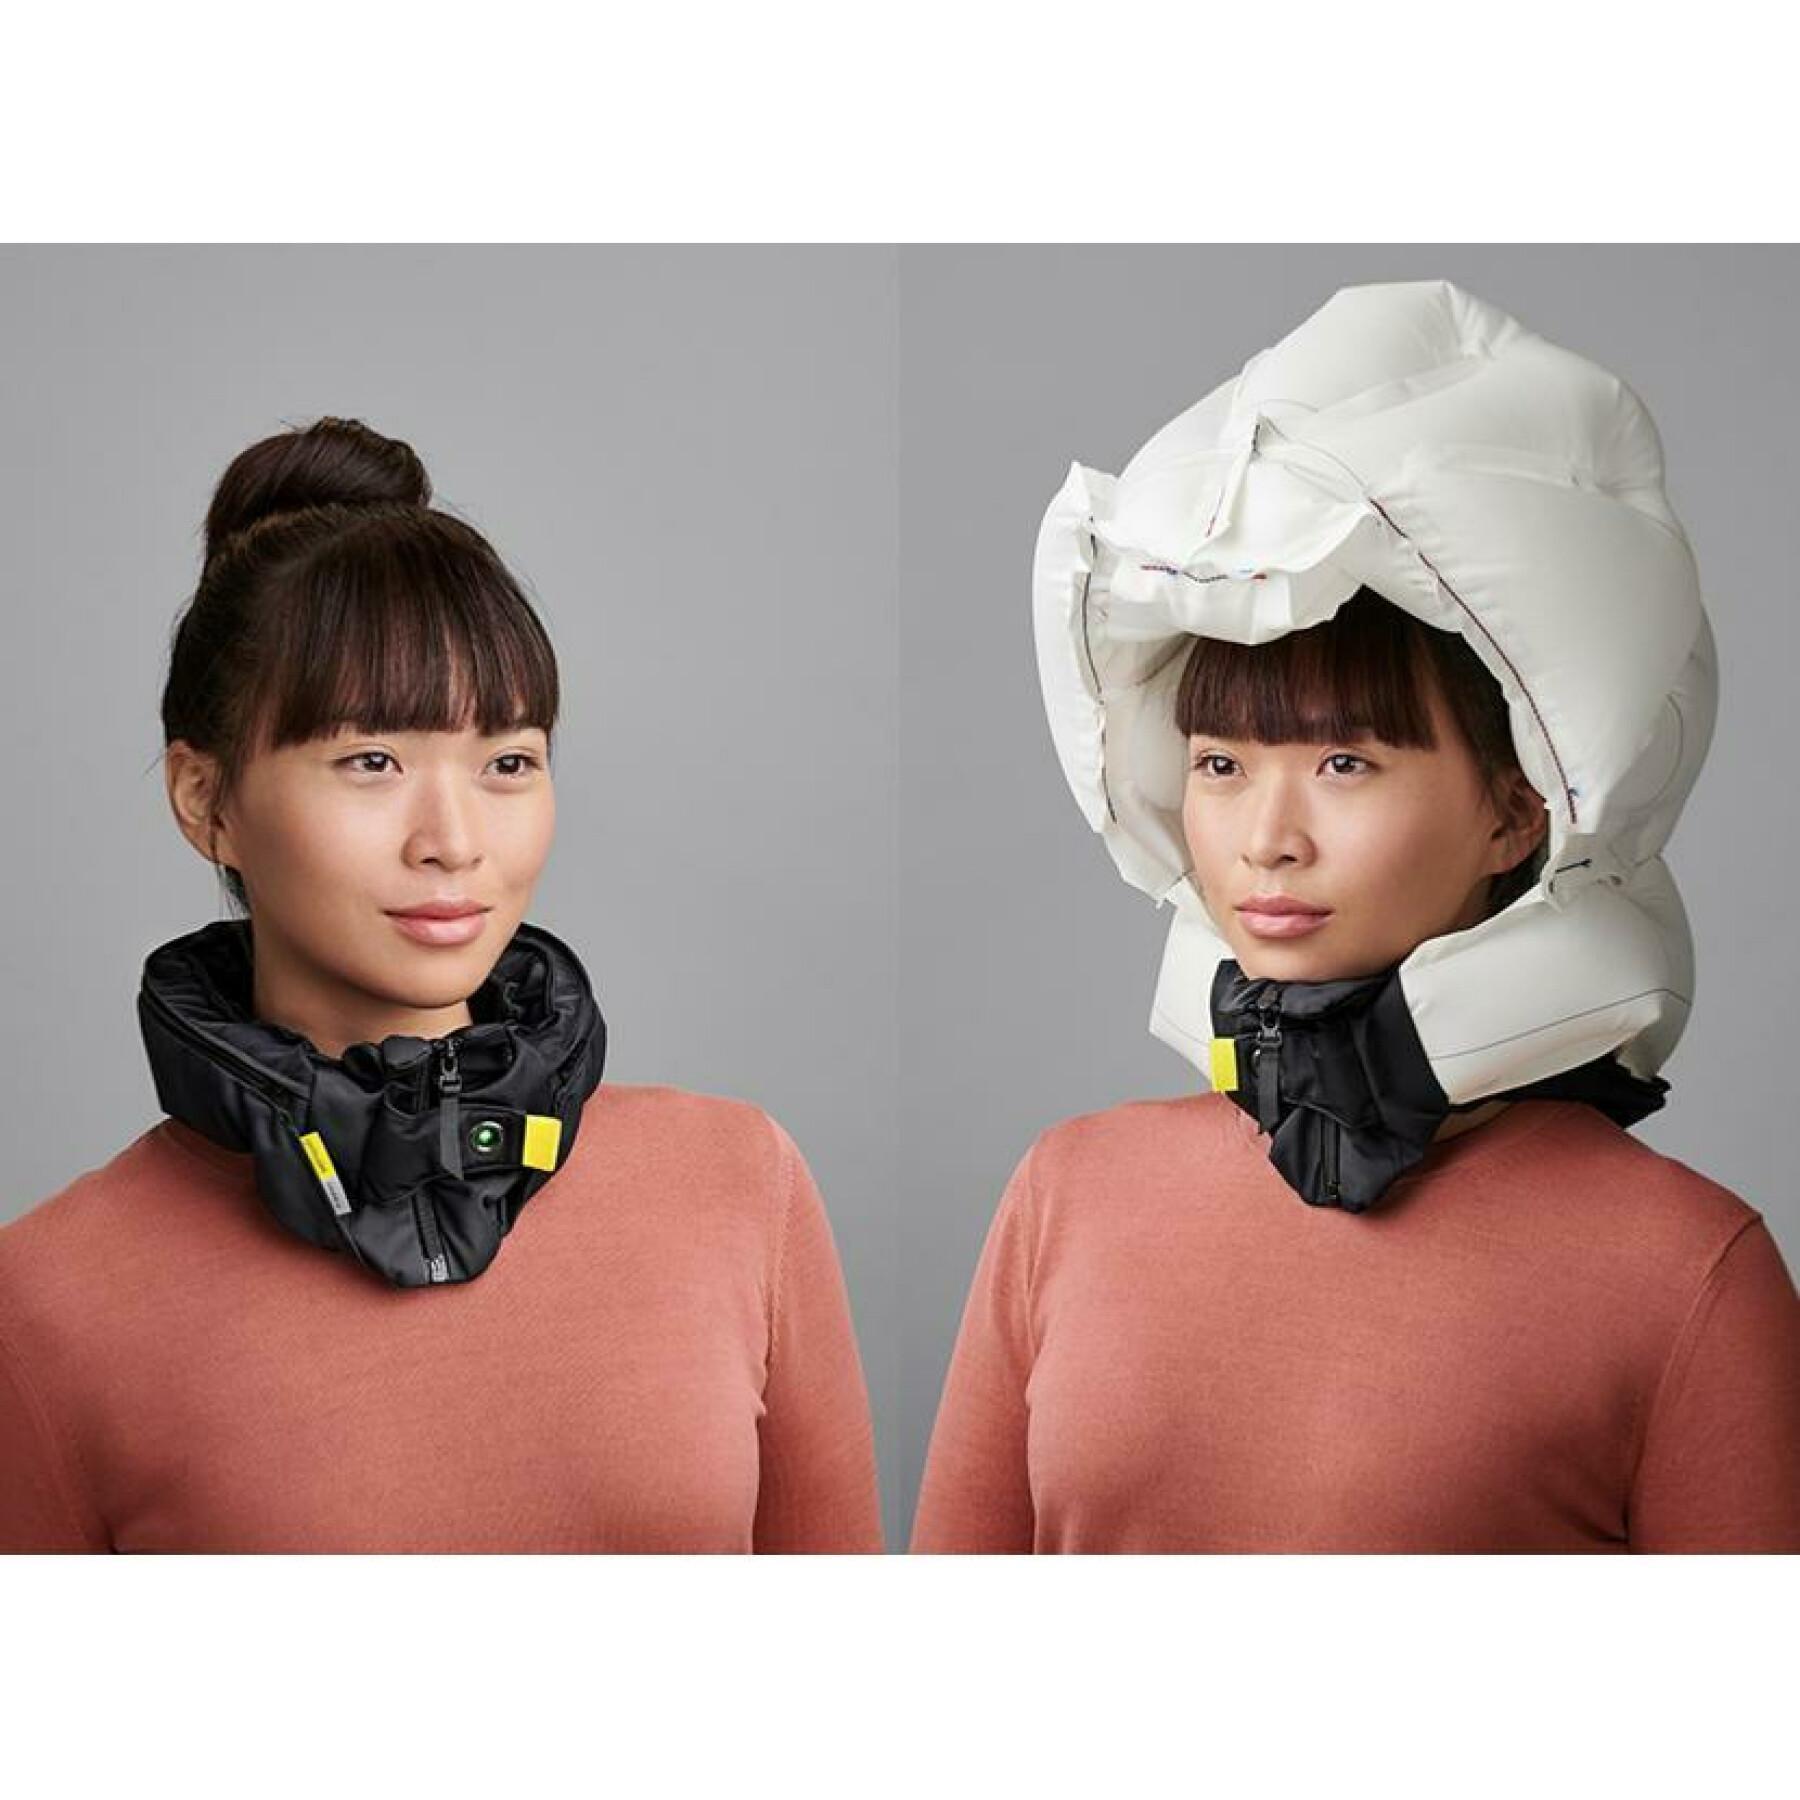 Automatic airbag bicycle helmet Hovding 3.0